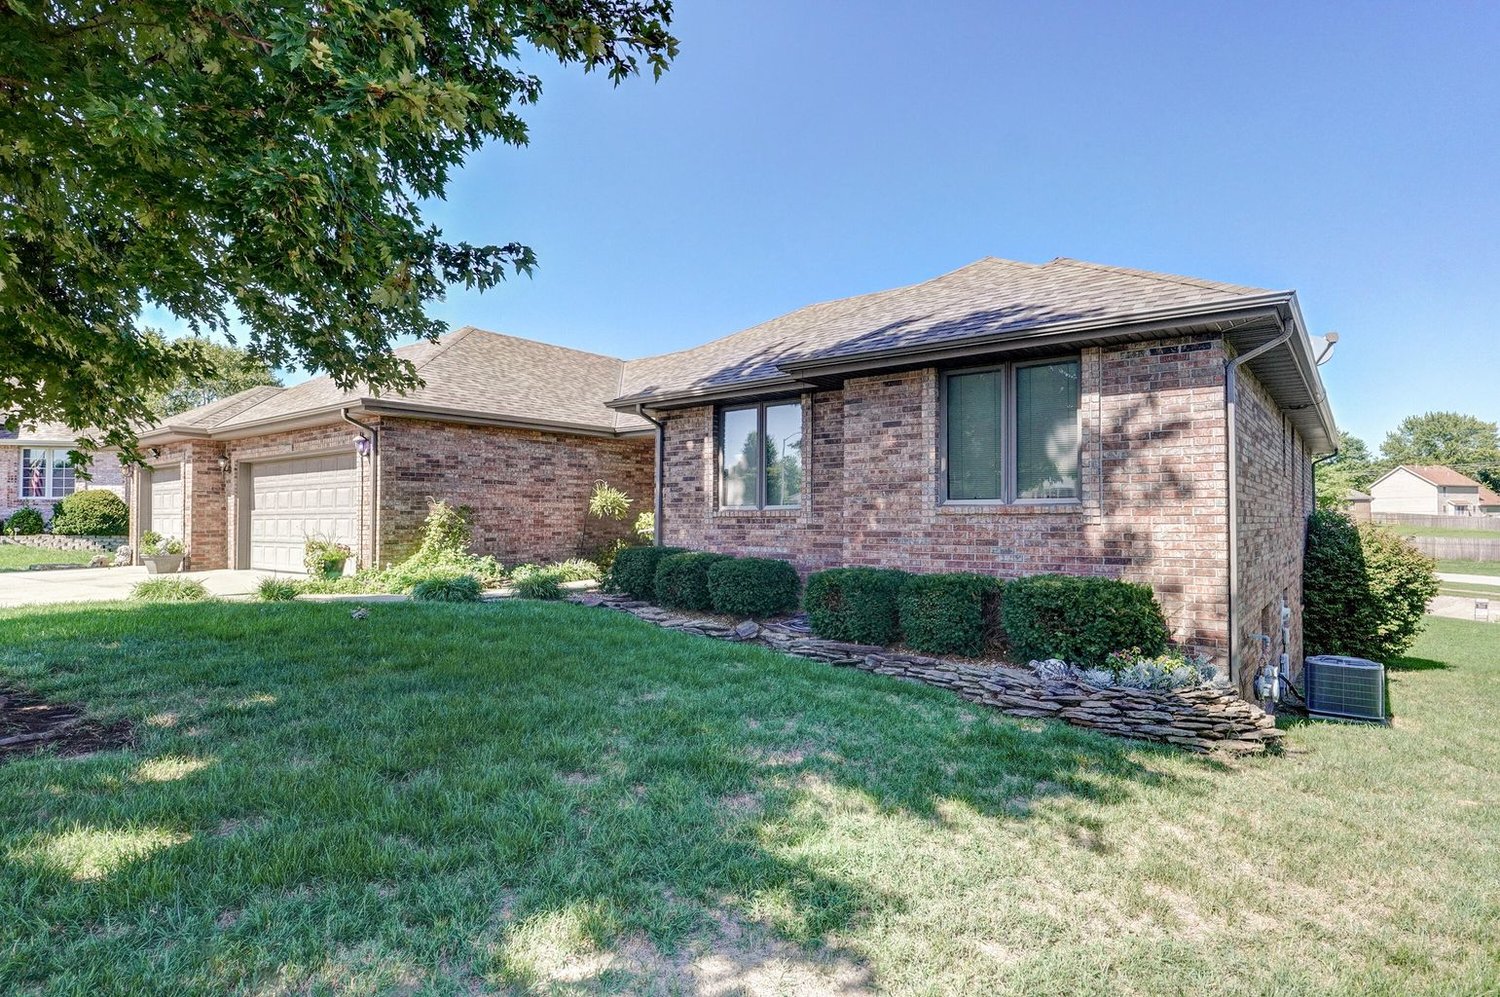 3525 W. Beechwood Place
$585,000
Bedrooms: 4
Bathrooms: 4
Listing firm: Keller Williams Greater Springfield